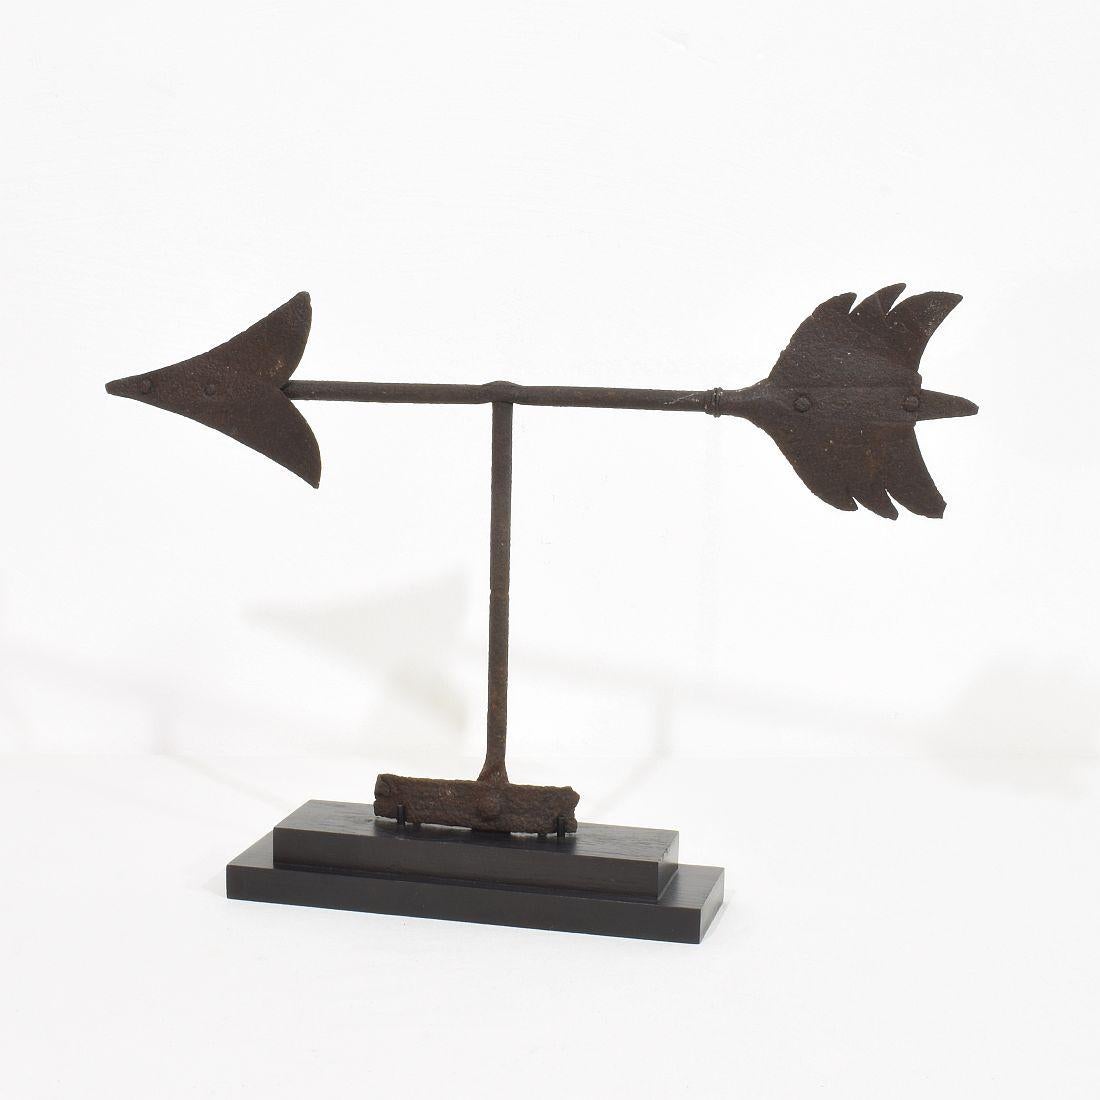 Beautiful iron weathervane roof finial. Very rare piece.
France, circa 1800-1850.
Weathered
Measurement includes the wooden base.